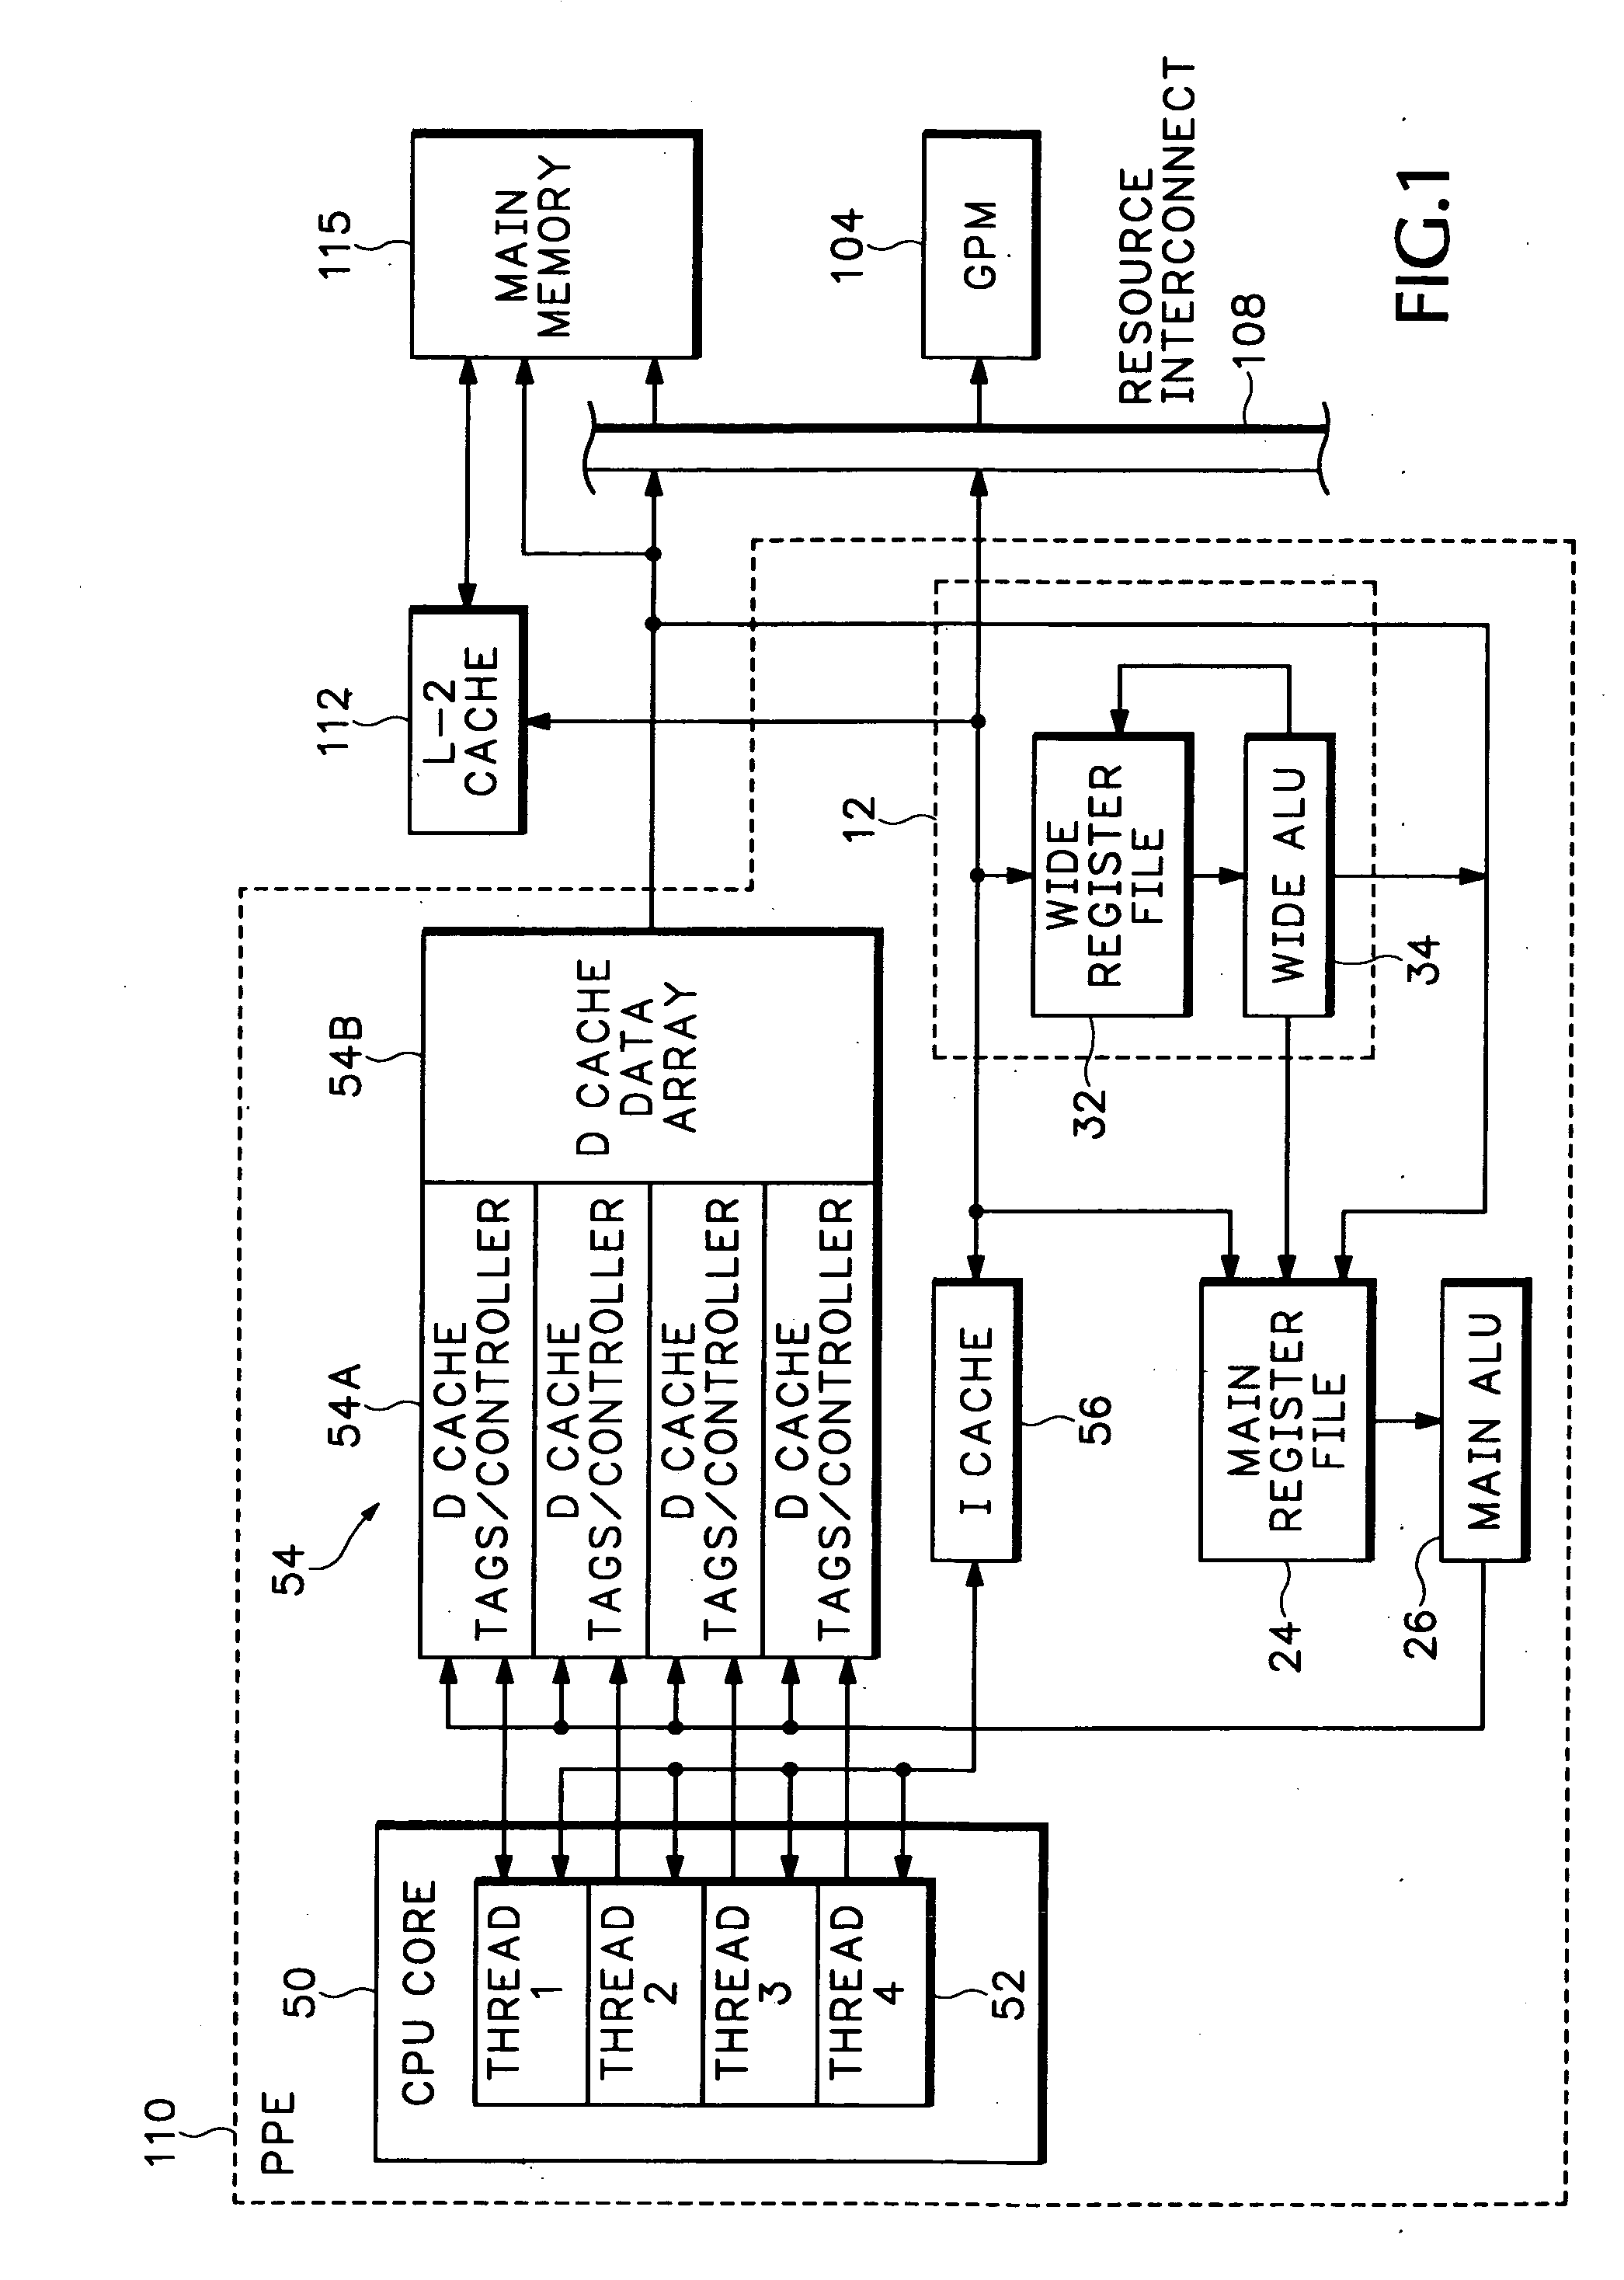 Packet processor with wide register set architecture